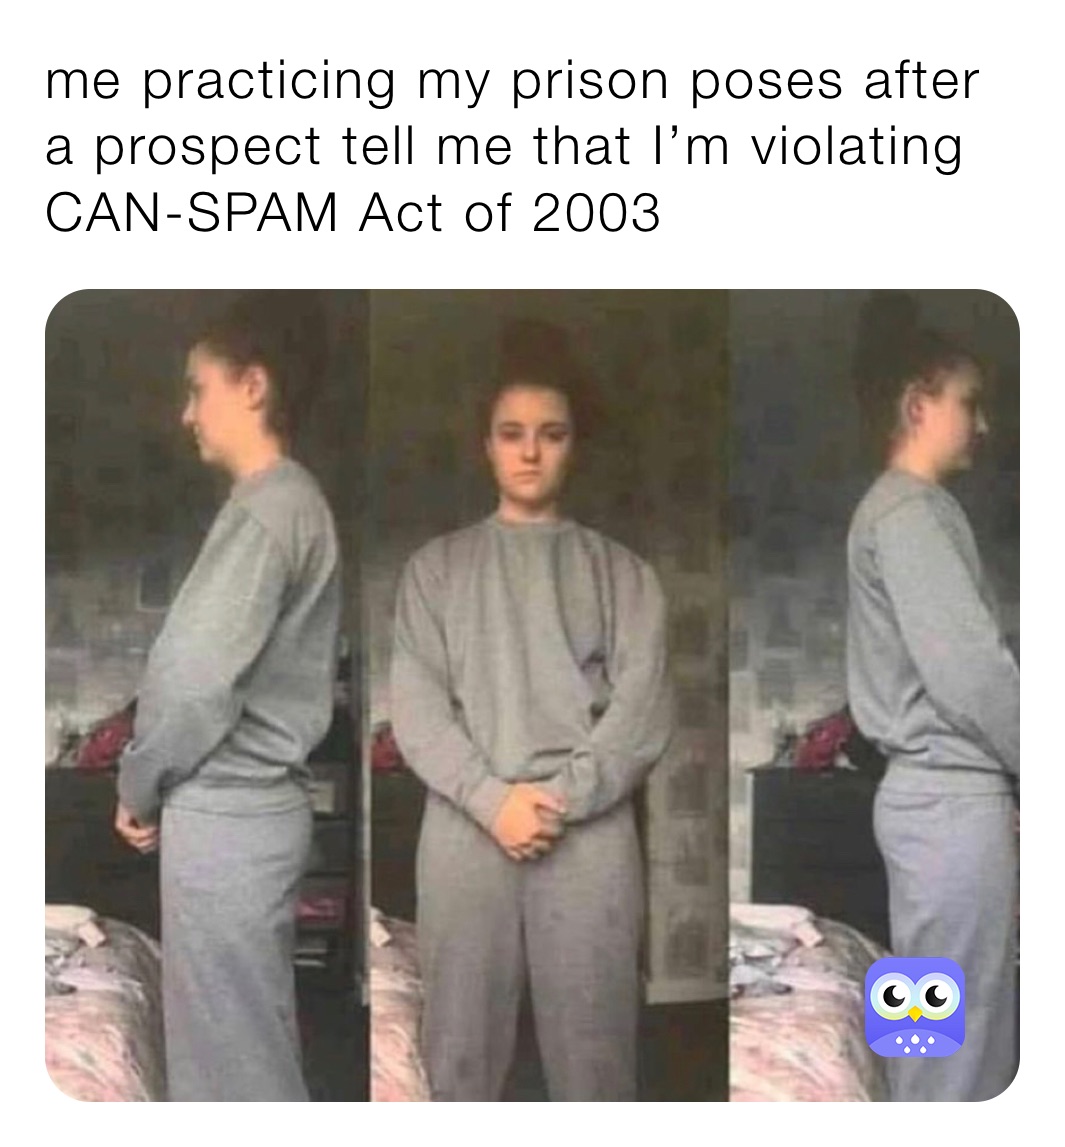 me practicing my prison poses after a prospect tell me that I’m violating CAN-SPAM Act of 2003